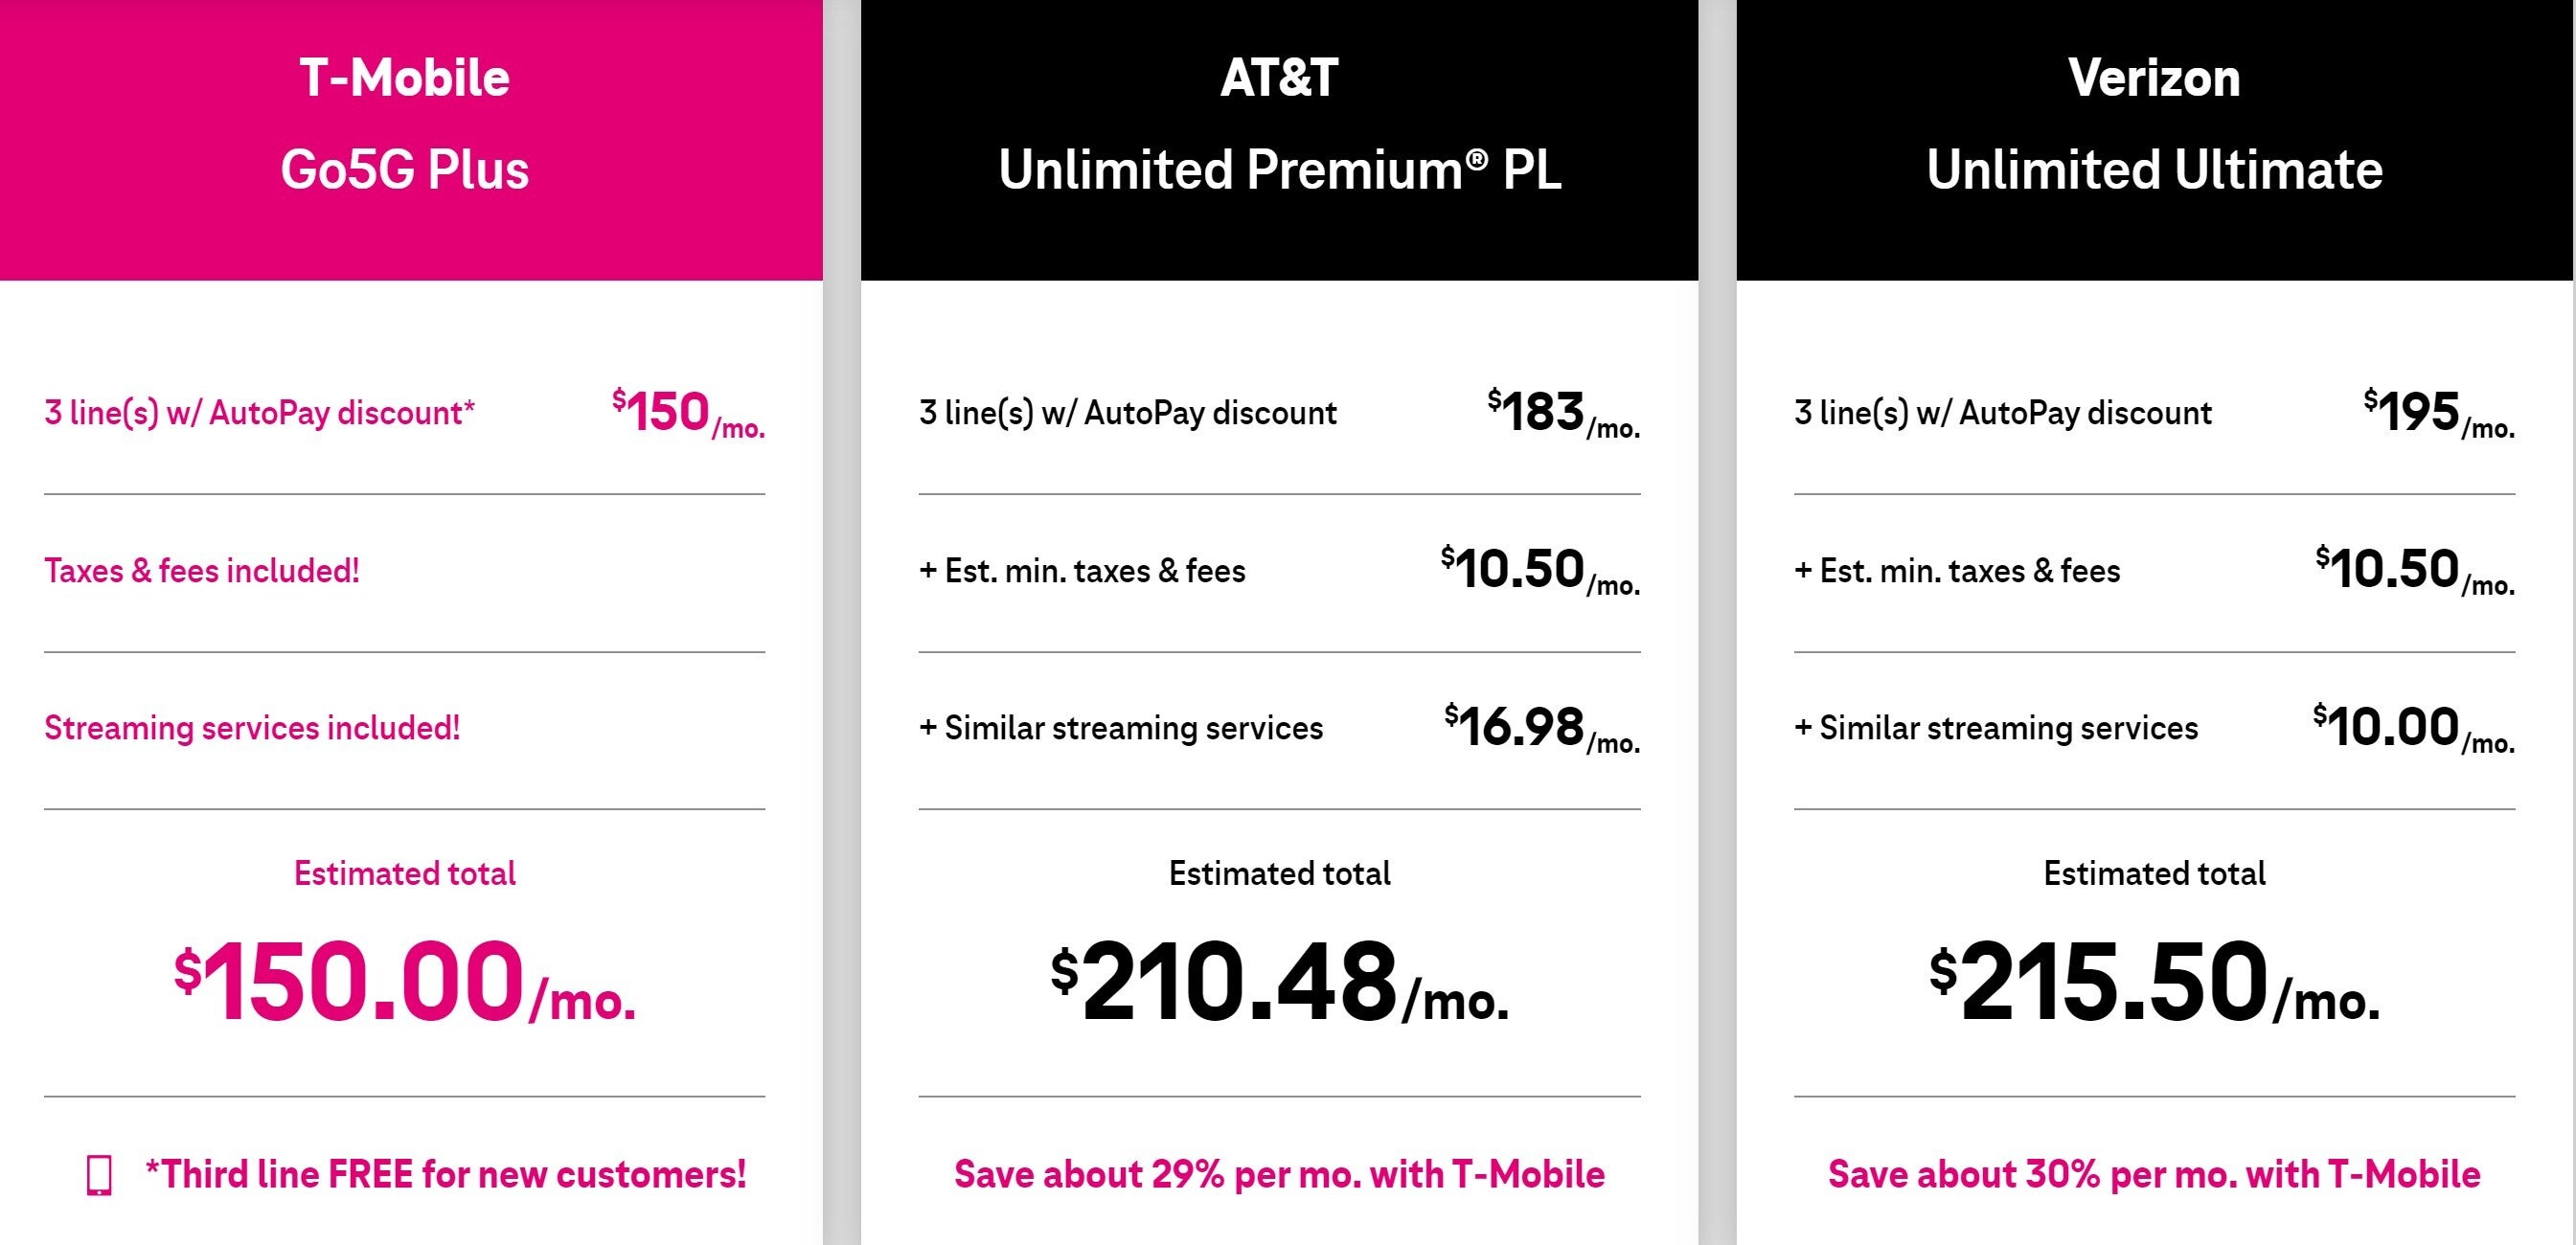 T-Mobile touting its Un-carrier chops - T-Mobile's crafty way to charge extra fees and still remain Un-carrier